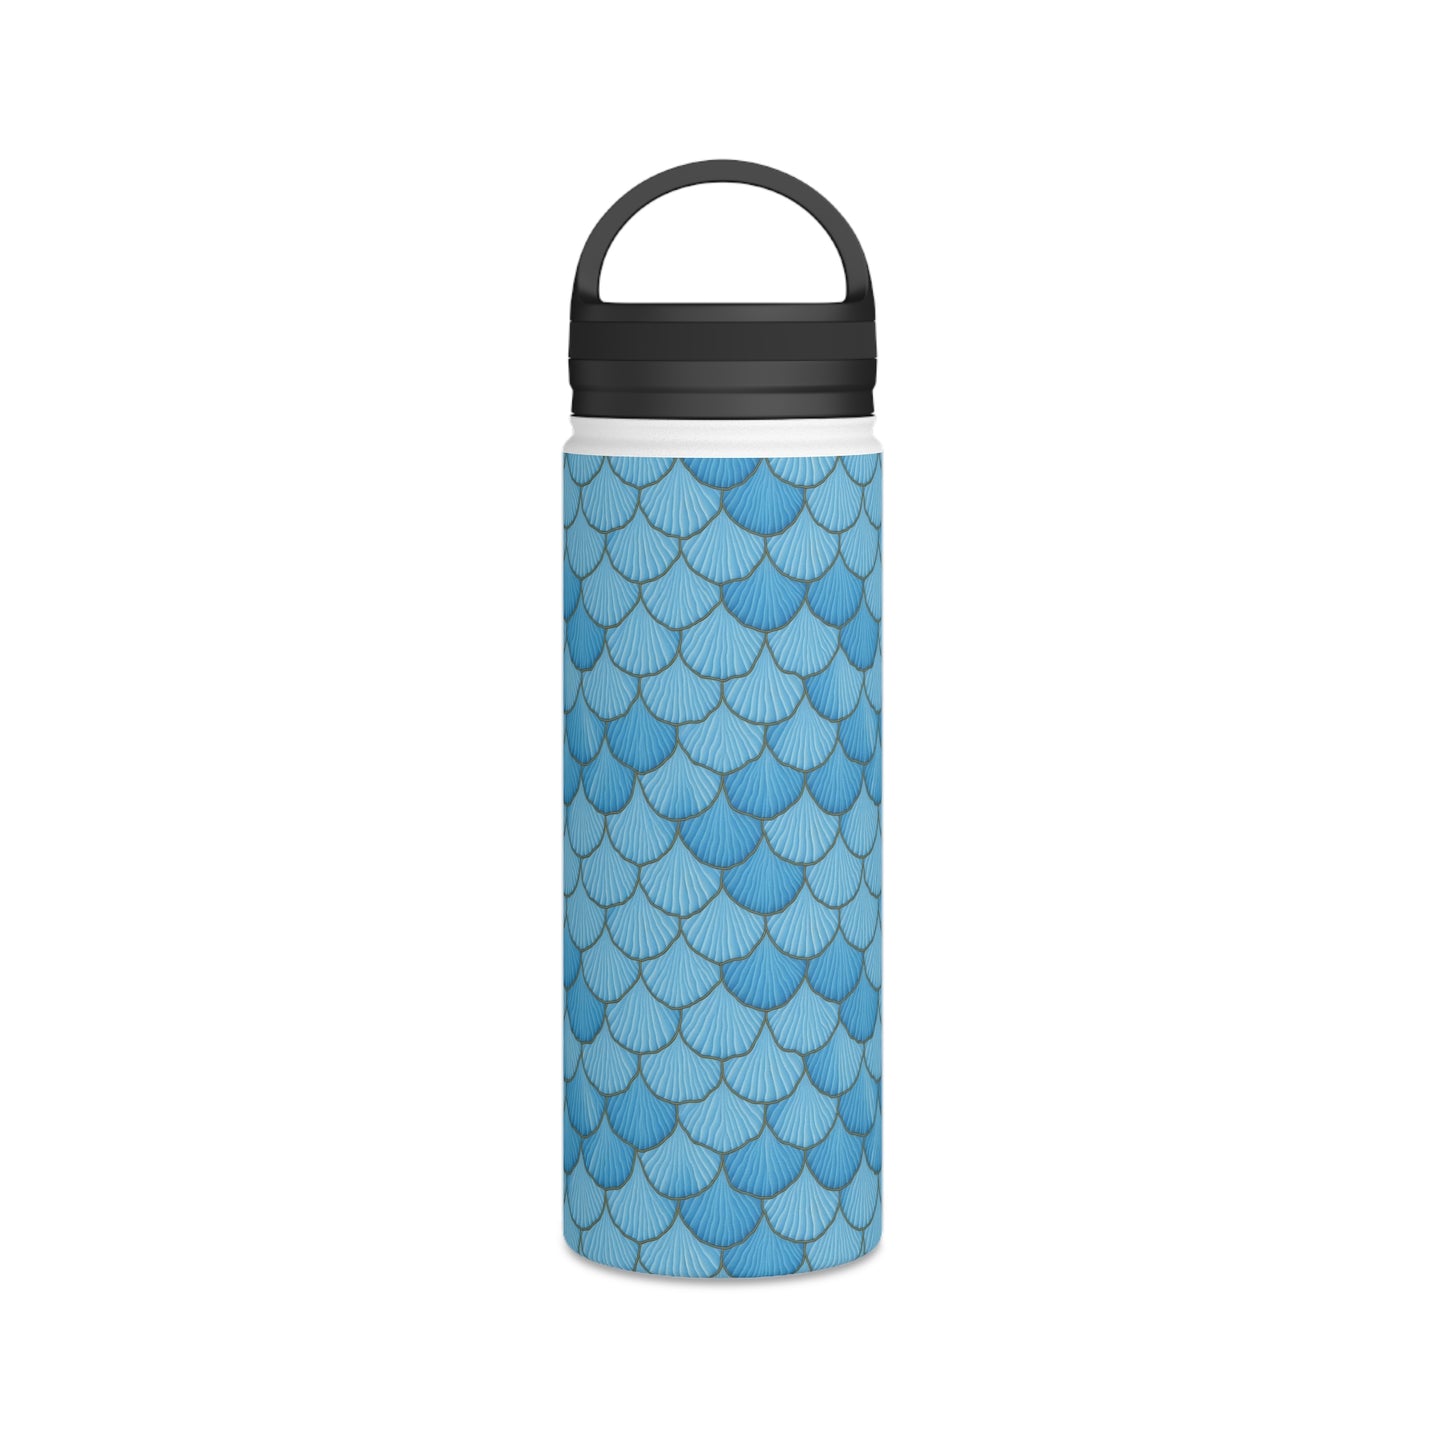 Dive into Enchantment Blue Mermaid Seashell Stainless Steel Water Bottle, Handle Lid, Reusable eco friendly, Reduce Waste, Green Living